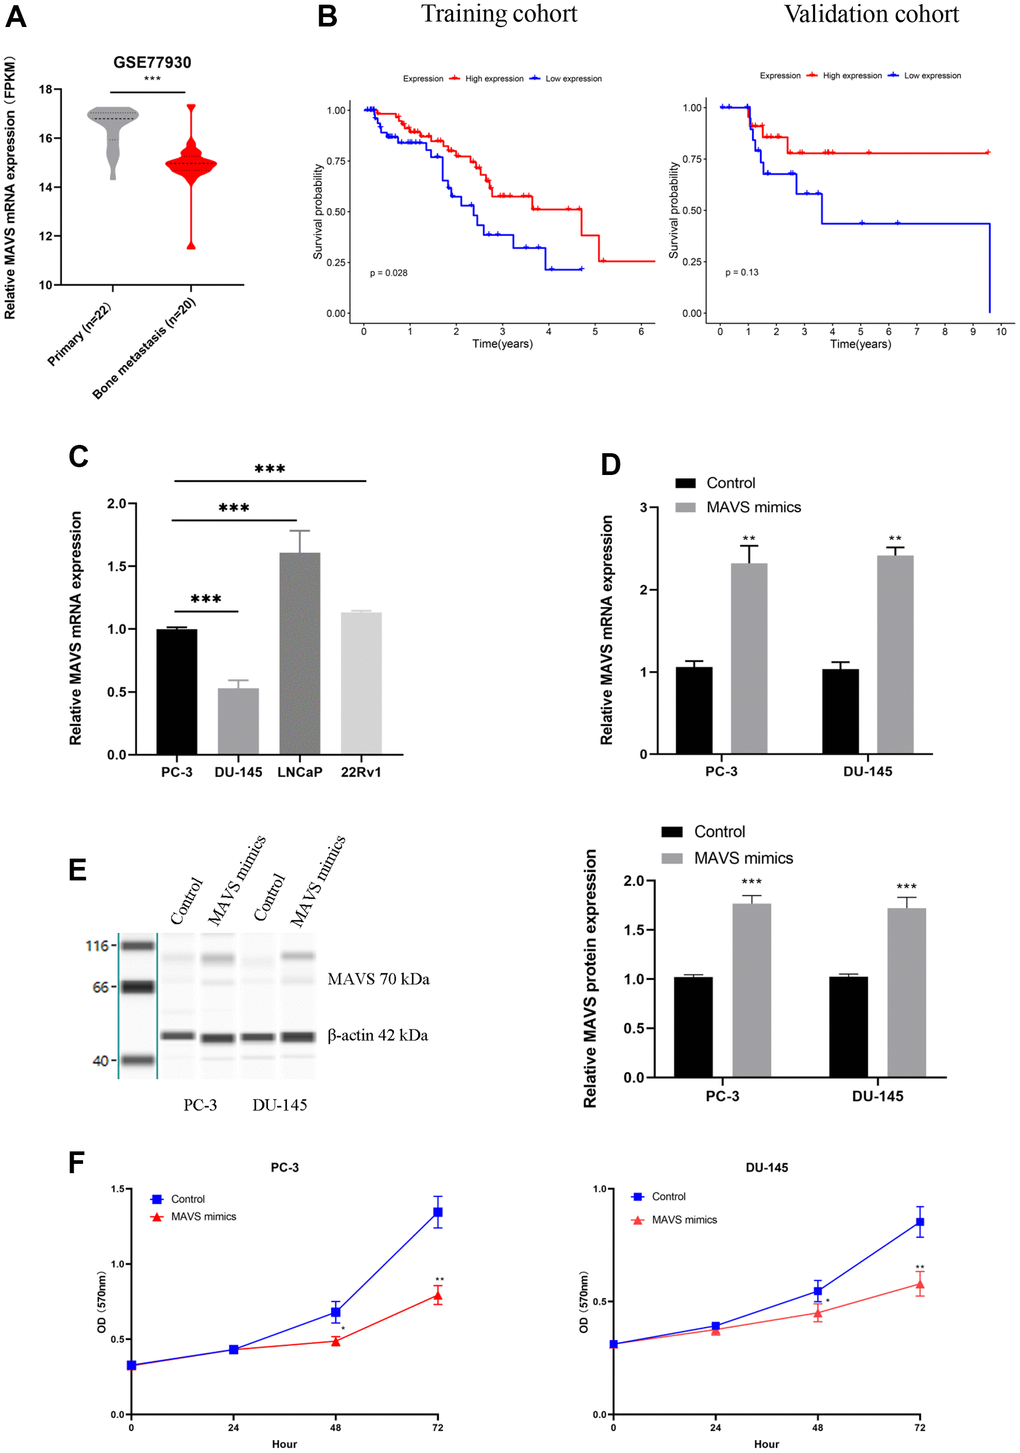 Up-regulation of MAVS suppressed PCa cells’ proliferation and metastasis. (A) MAVS expression of primary (n=22) and bone metastasis (n=20) of PCa in GSE77930. (B) The OS analysis of MAVS expression in the training and validation cohorts. (C) Relative MAVS mRNA expression in the PCa cell line. (D, E) Overexpression efficiency of MAVS in PC-3 and DU-145 cells by RT-qPCR and capillary immunoblotting. (F) Assessment of proliferation ability in PC-3 and DU-145 cells with MAVS (controls and mimics) via MTT assay. The original blots are provided in Supplementary Figure 5. *P 